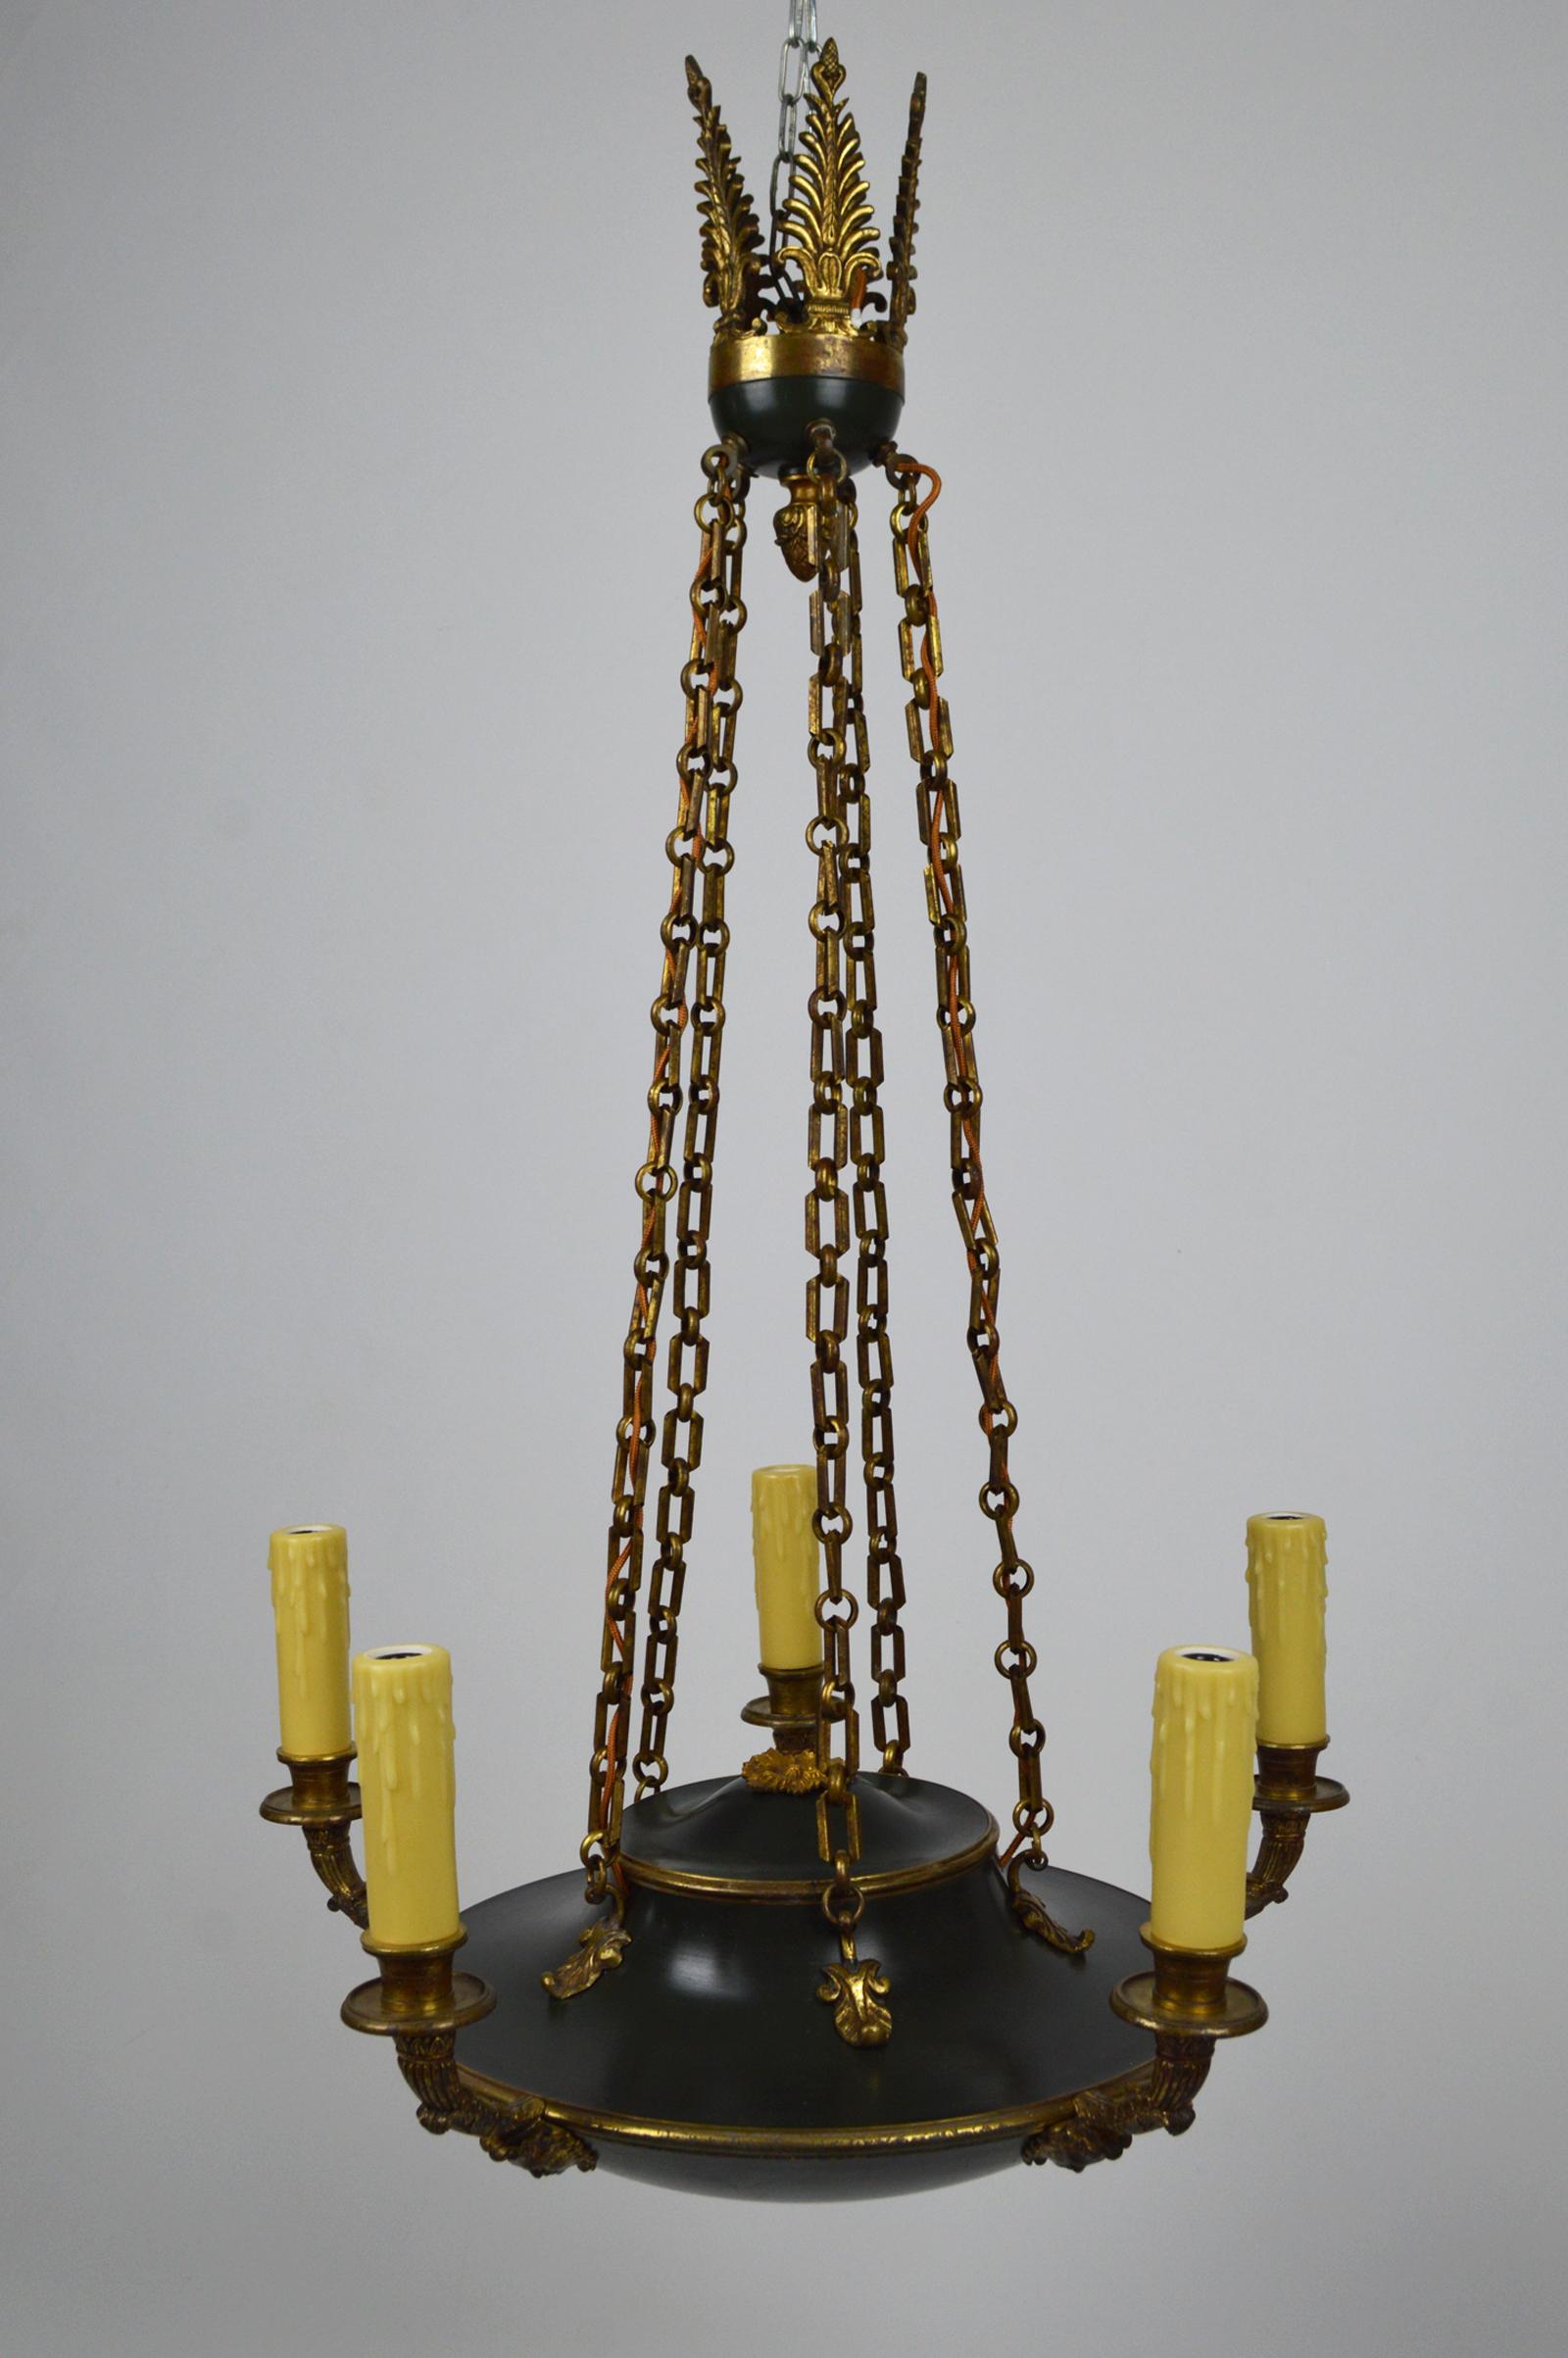 Antique French Empire Chandelier in Patinated Bronze, 19th Century For Sale 2